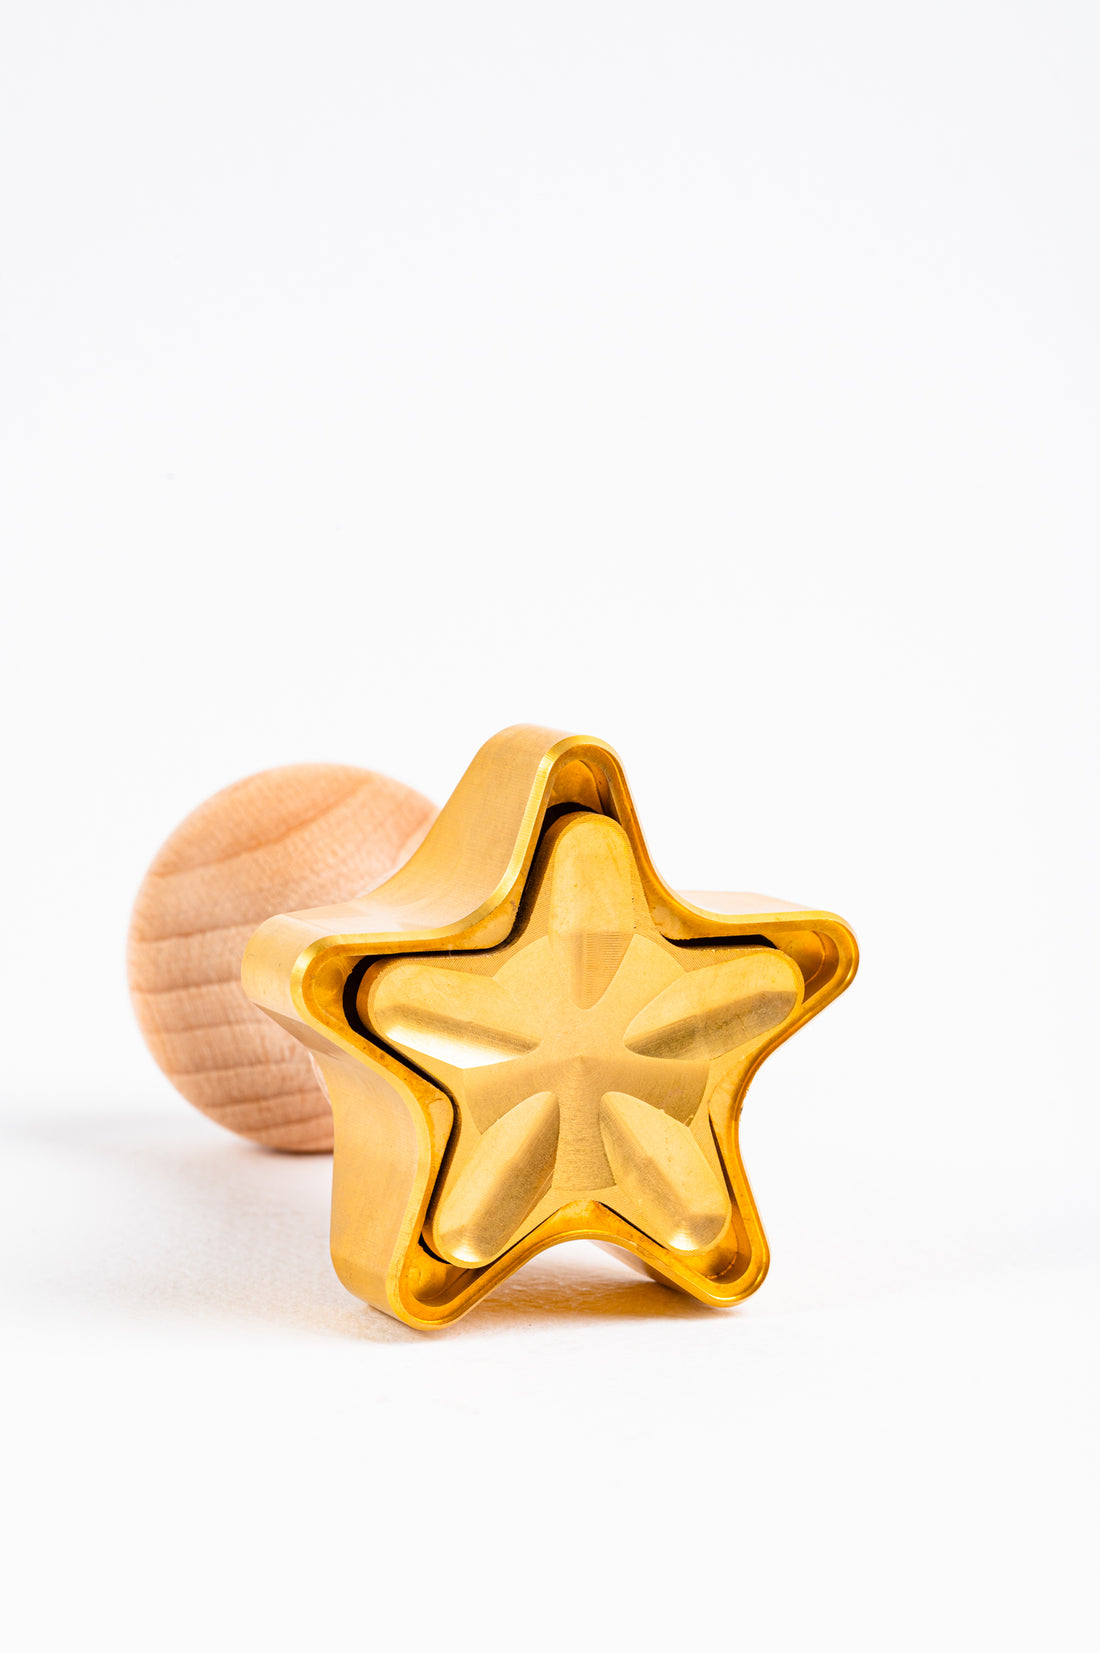 Professional Ravioli and Pasta STAR Stamp in Brass and Natural Wood - SOFIA